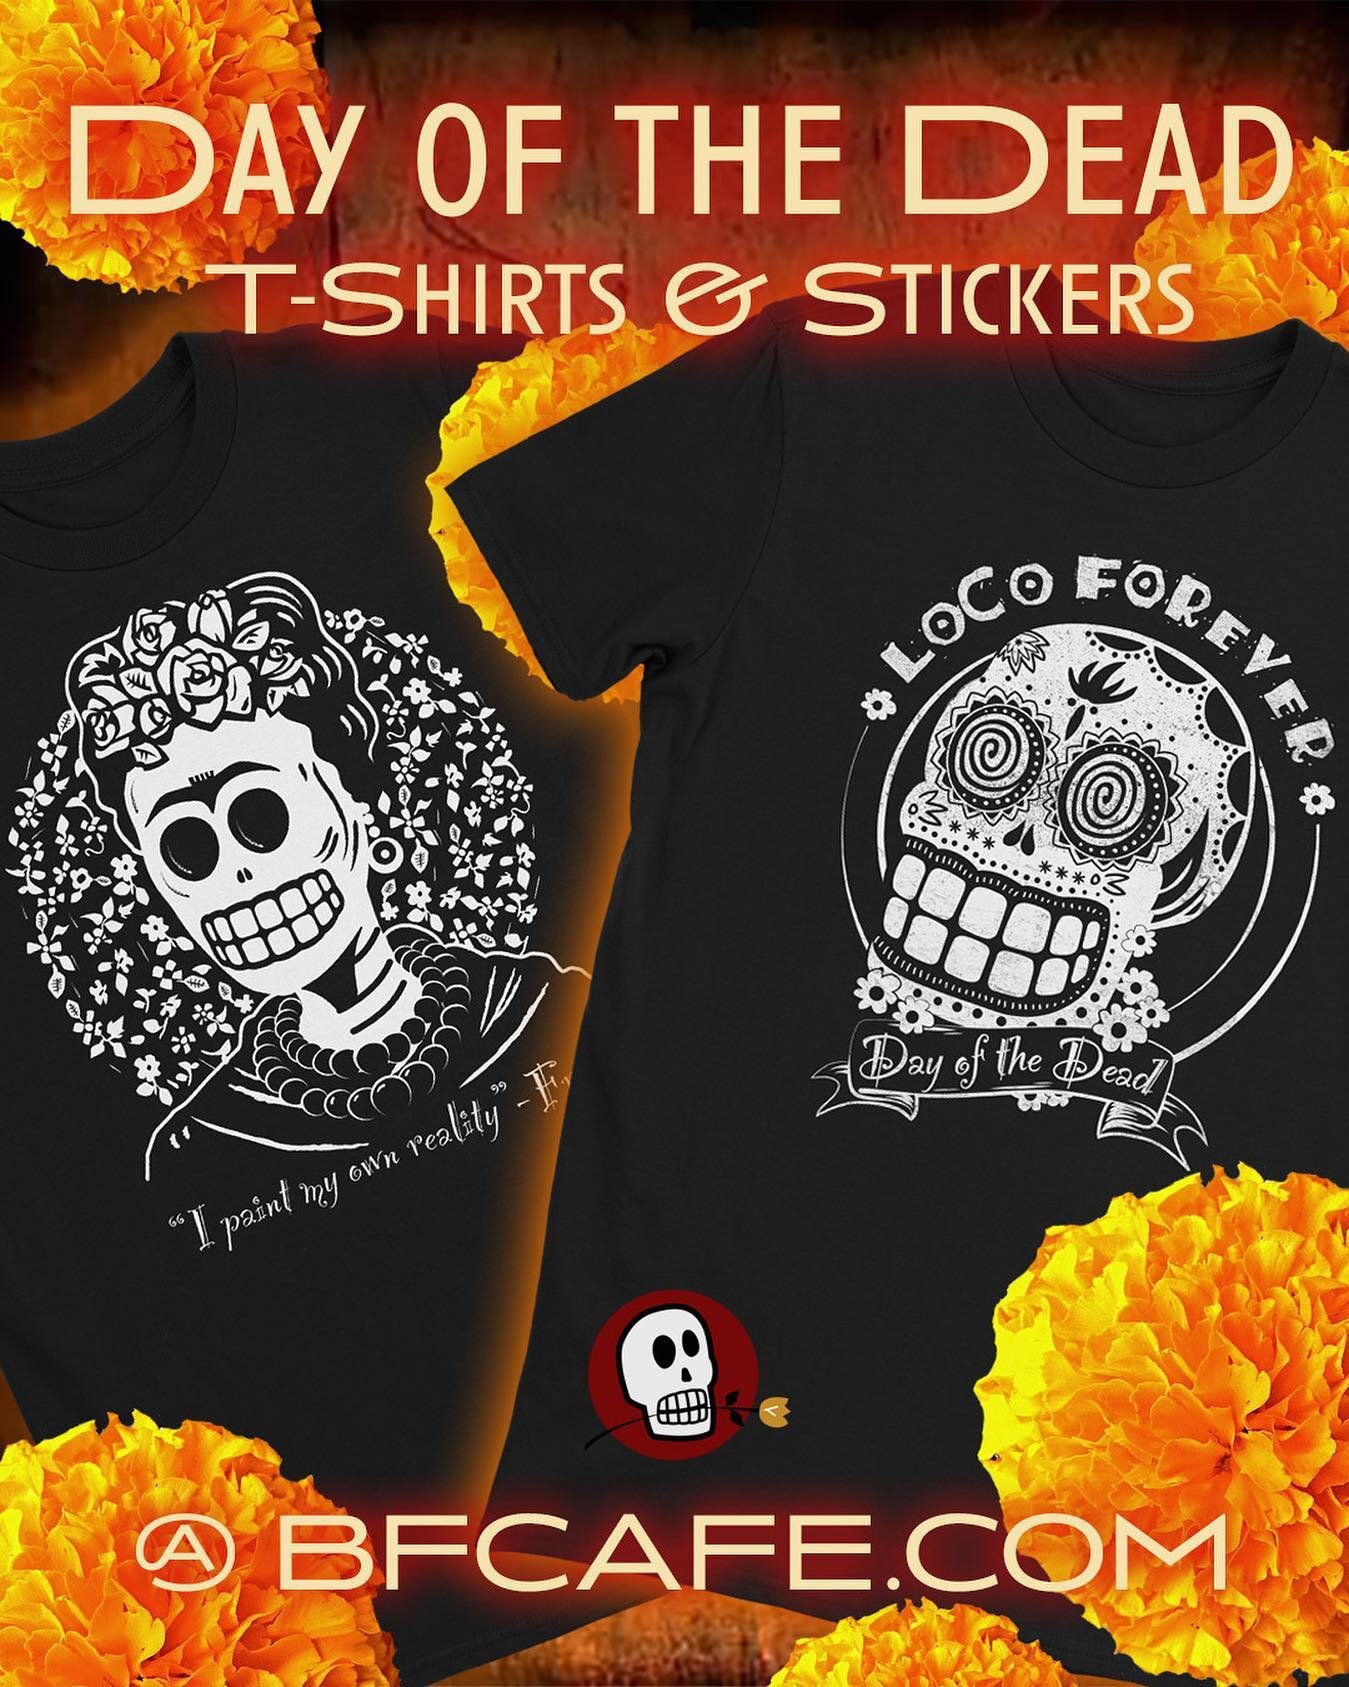 See our new 2022 Day of the Dead unisex T-Shirts at BF Cafe. 

#frida #fridakahlo #calavera #dayofthedead #diadelosmuertos #tshirt